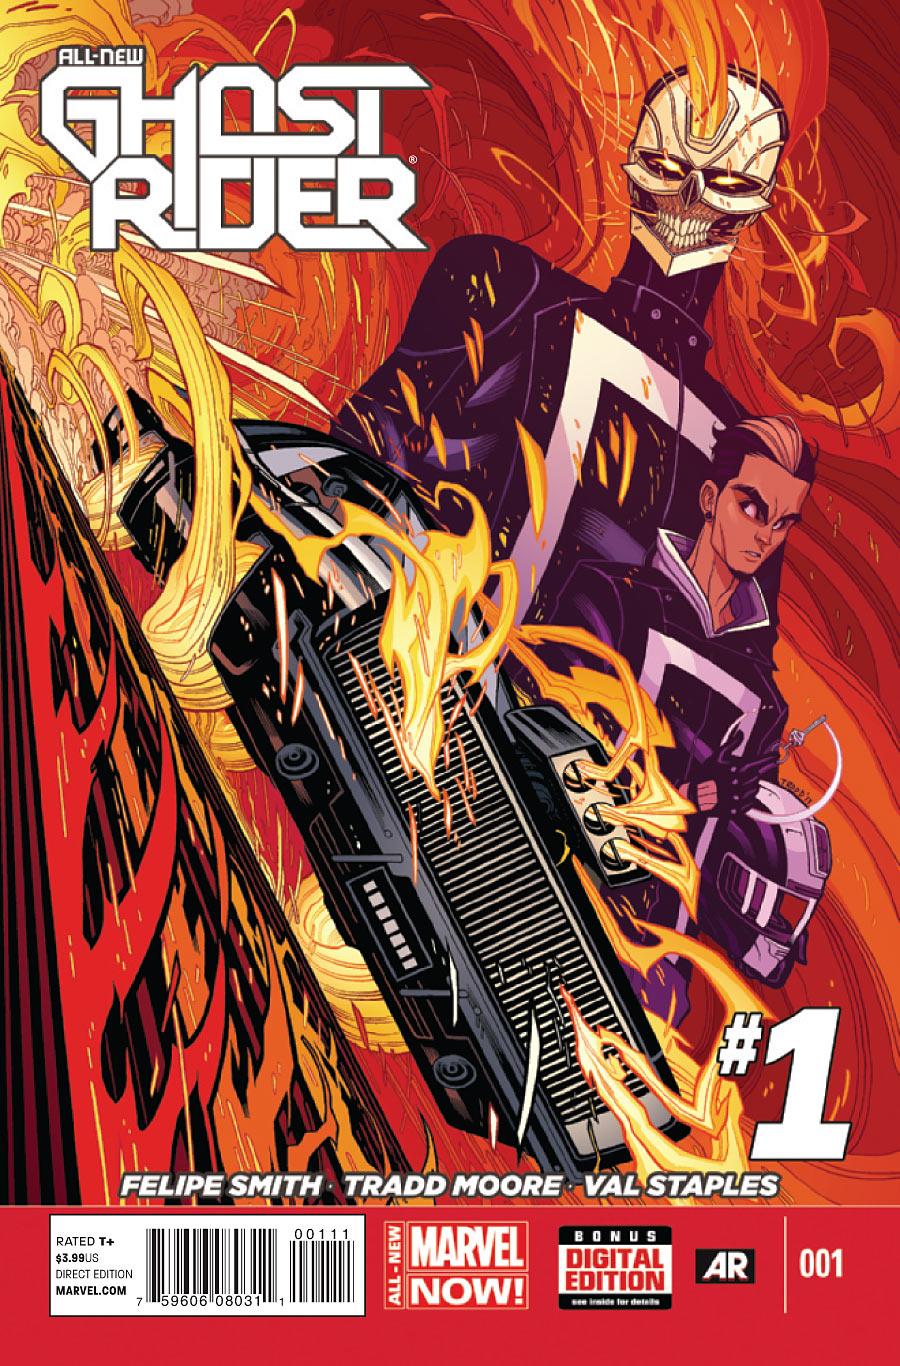 All-New Ghost Rider Vol. 1 #1